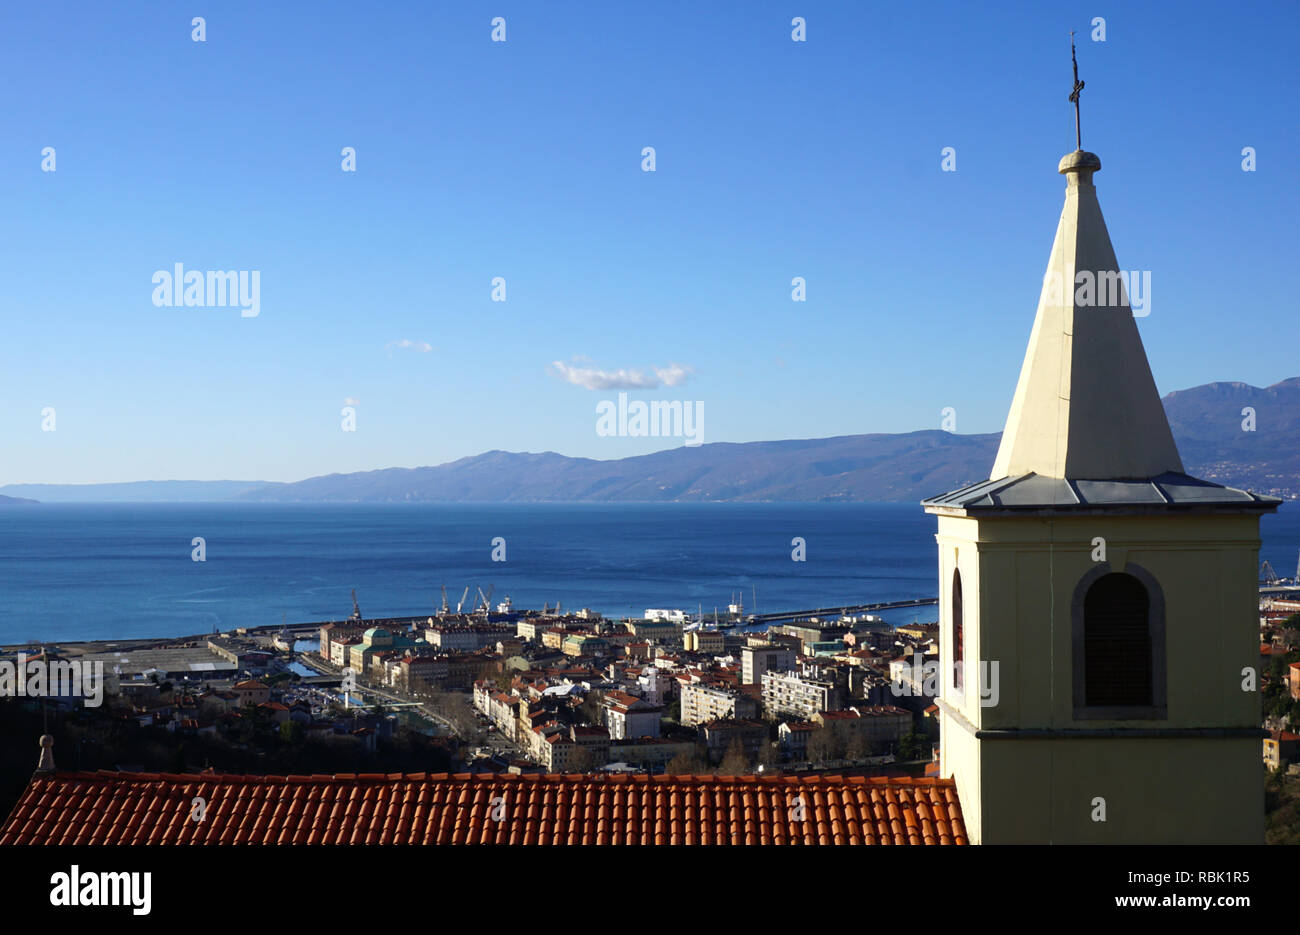 Belfry and roof Church of St. George the Martyr in Croatian town Rijeka, view from above on the town Stock Photo